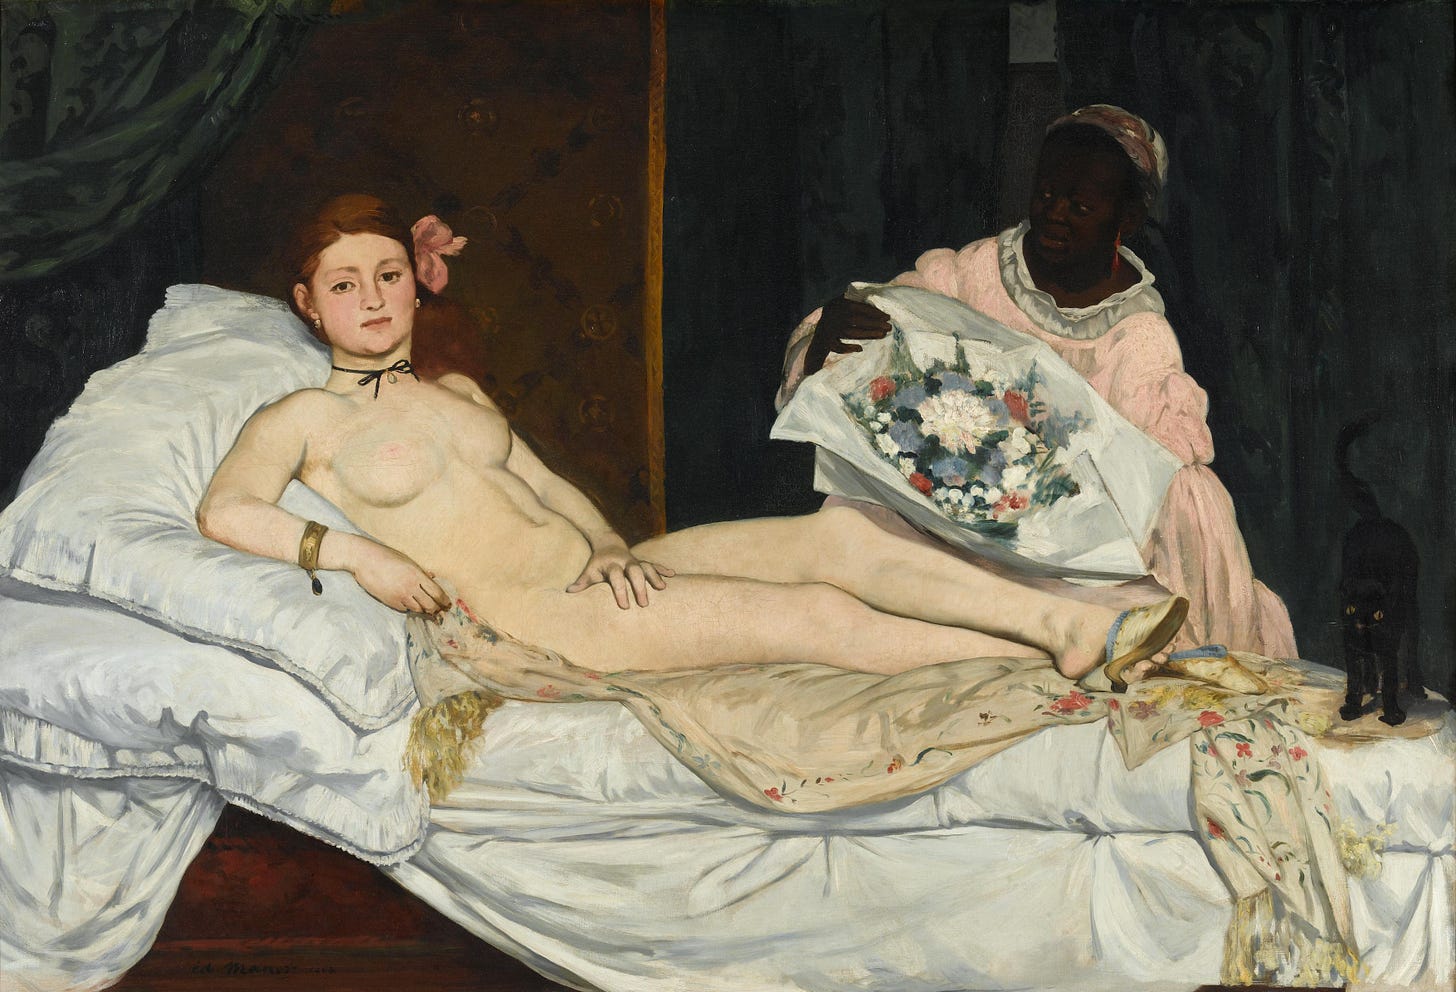 a nude white woman looks directly at the viewer as she is reclined on a bed and a black maid presents a large bouquet to her